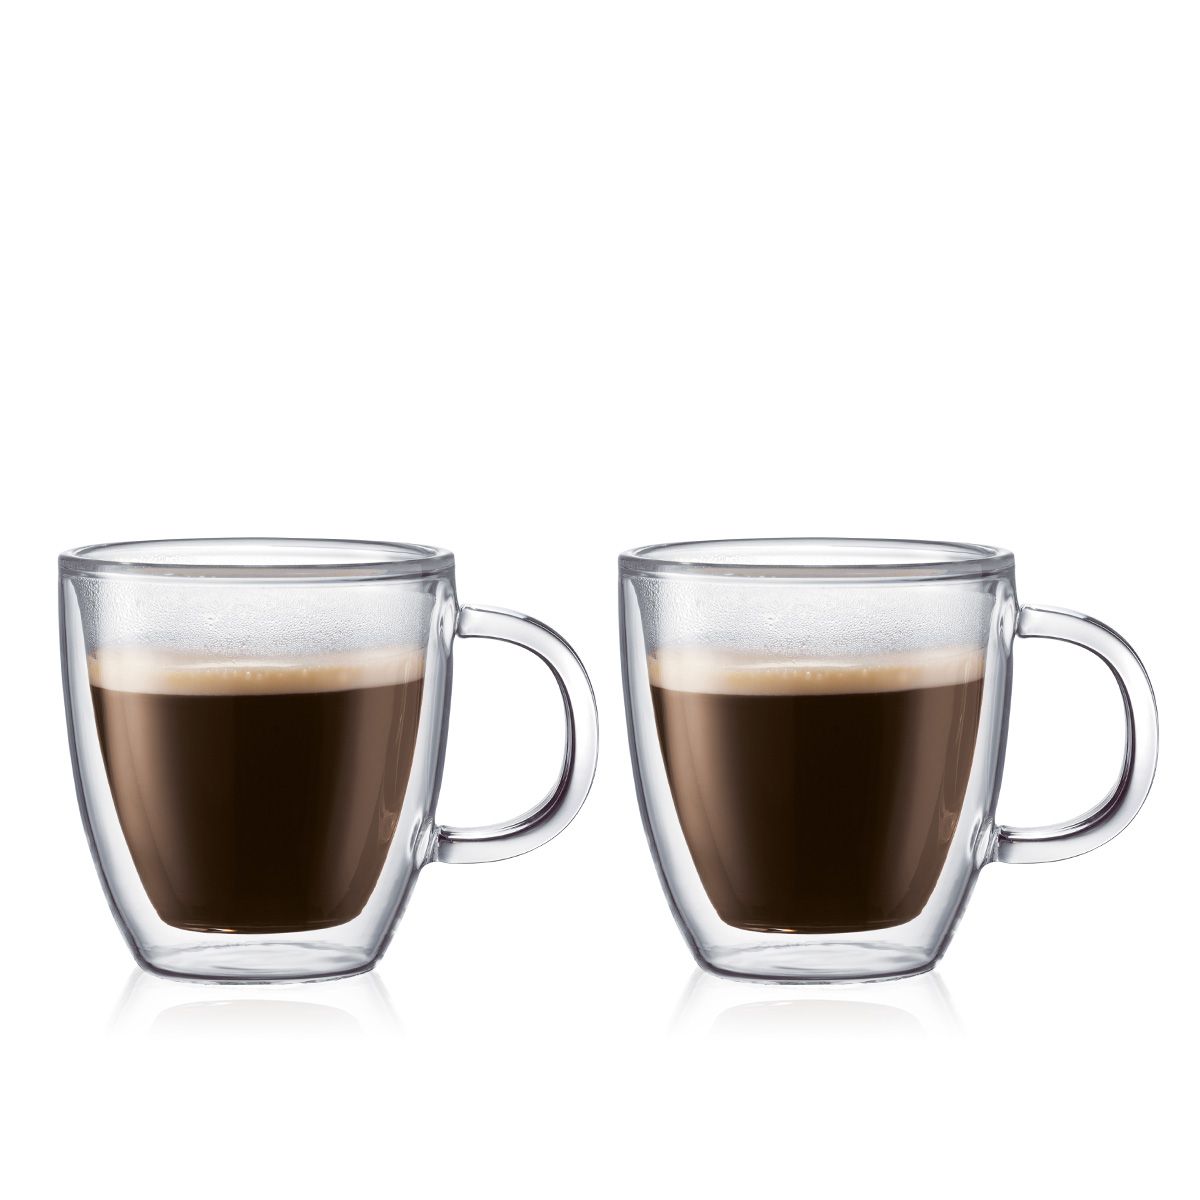 Bodum Bistro Espresso Double Walled Thermo Glasses With Glass Handle, 2 Pcs.